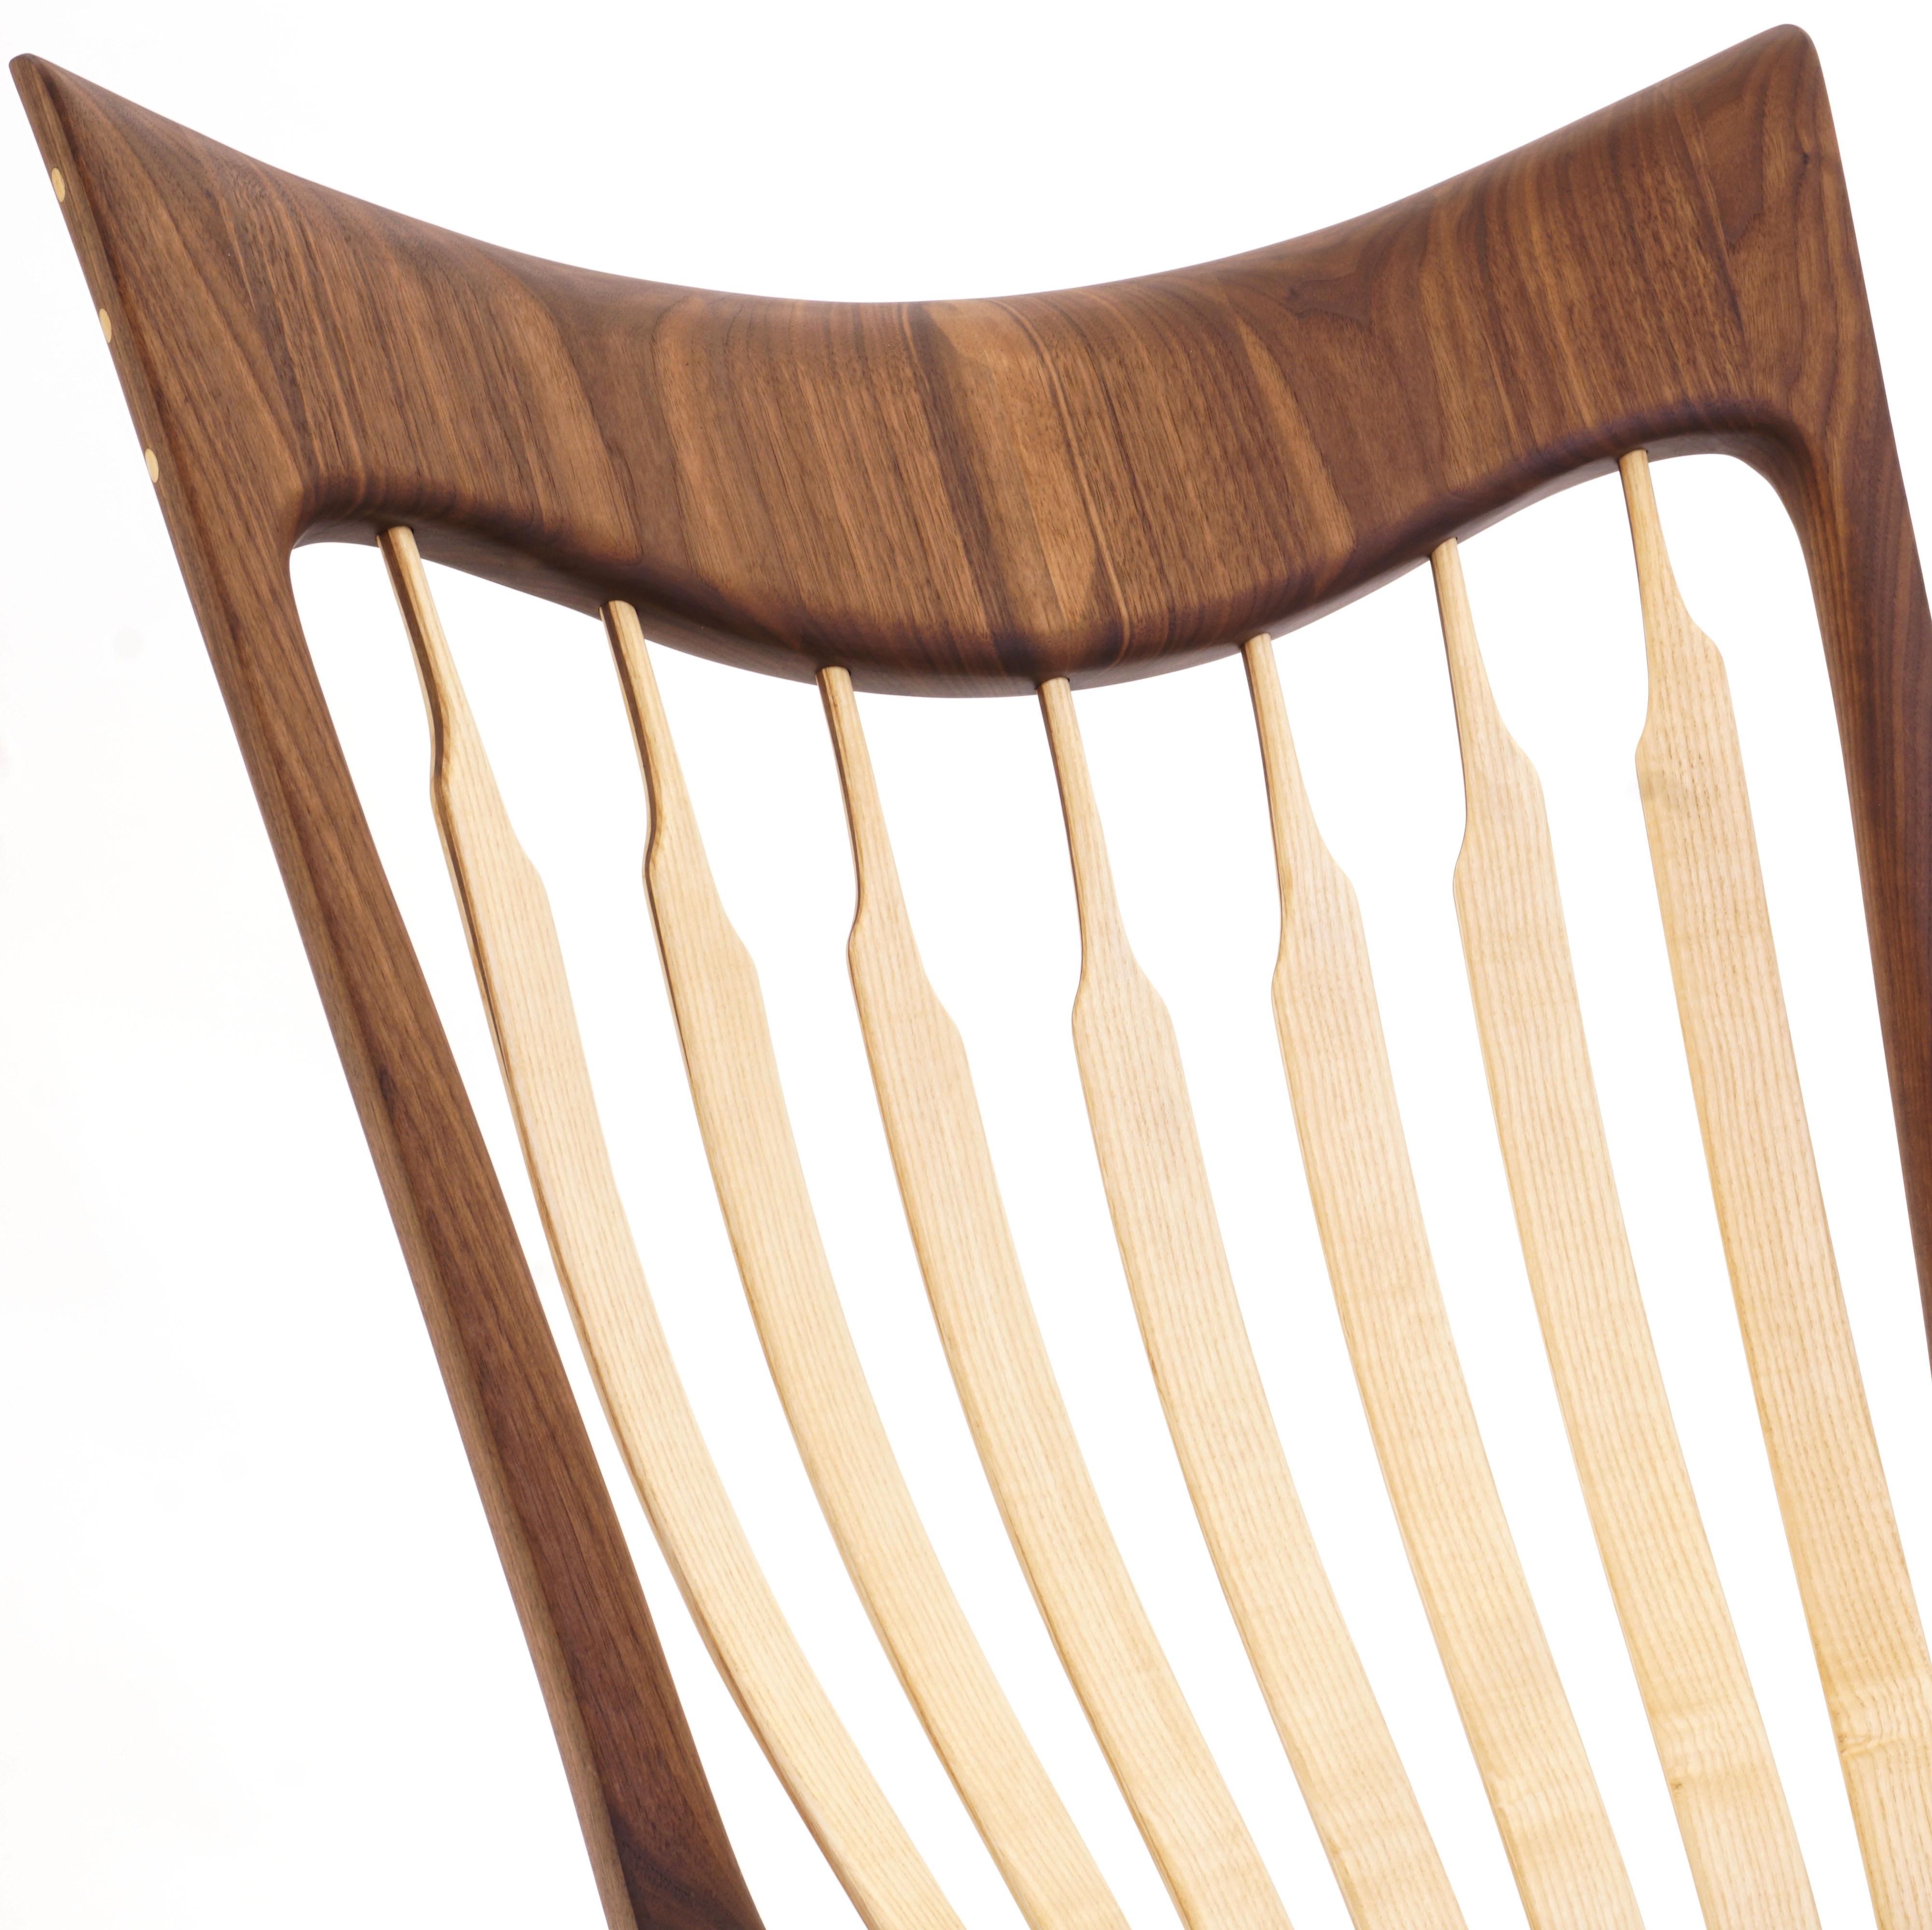 Modern Danish Walnut and Ash Tree Rocking Chair Handcrafted by Morten Stenbæk For Sale